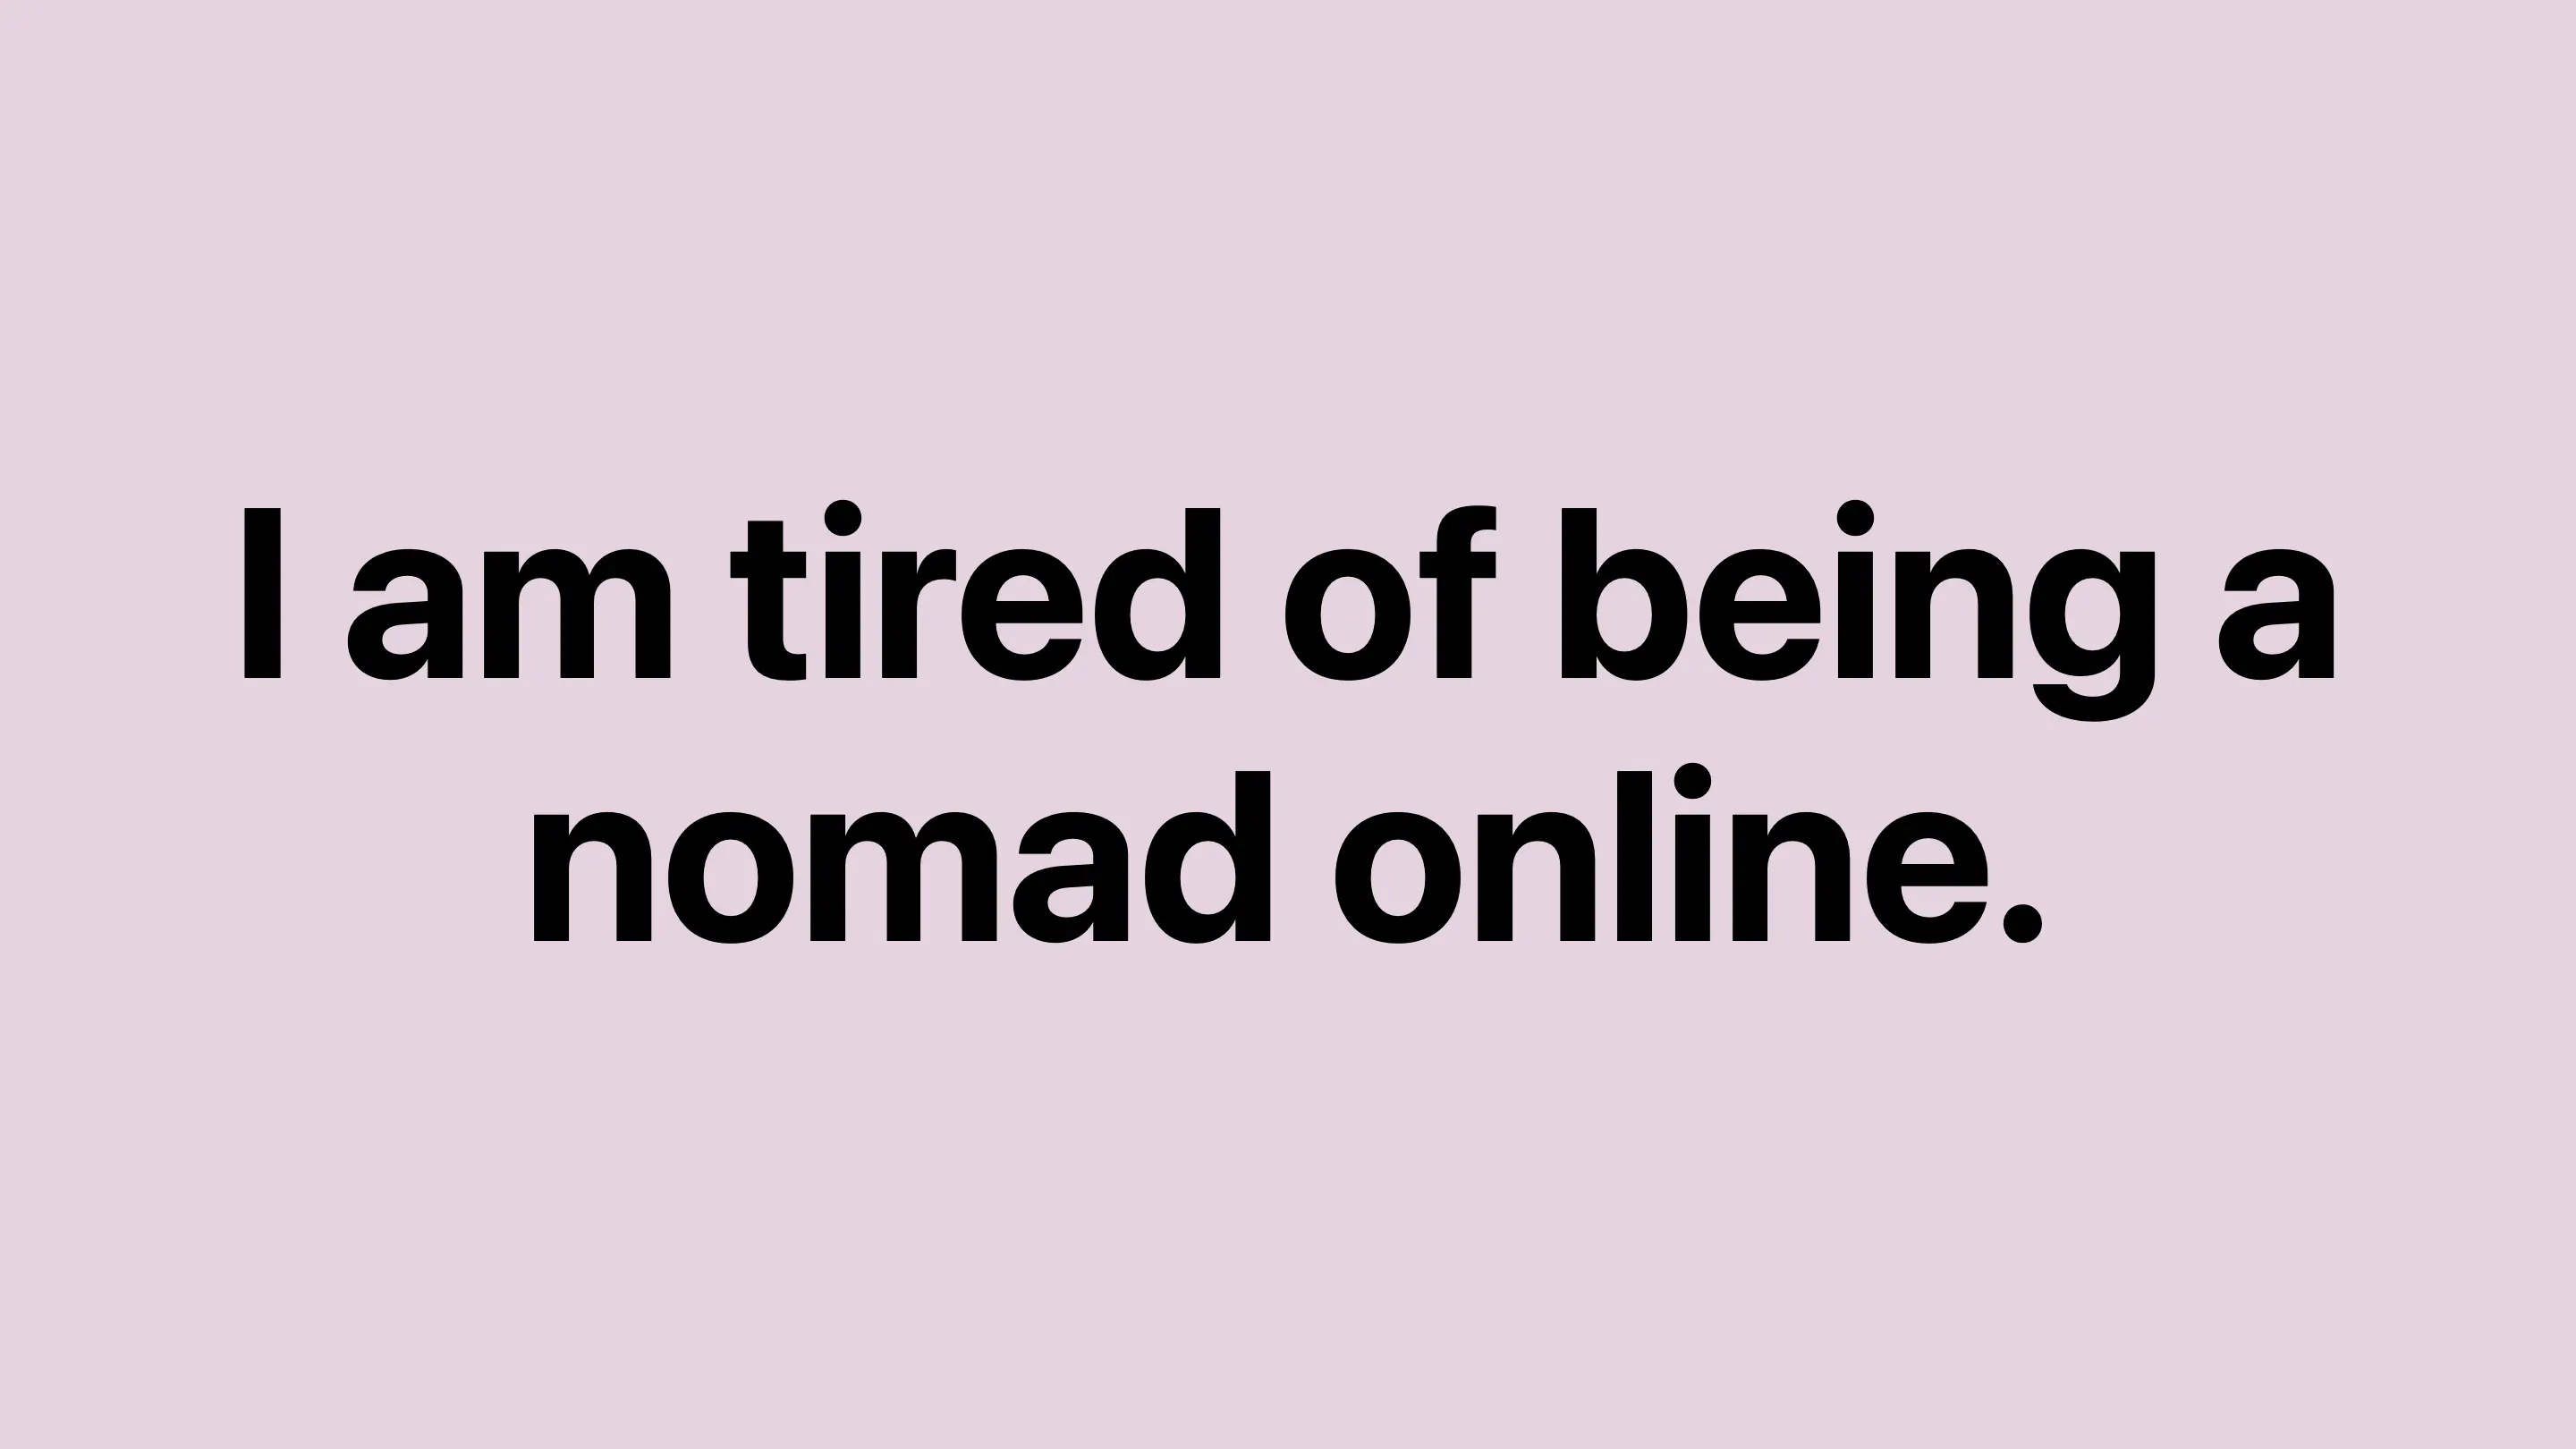 I am tired of being a nomad online.